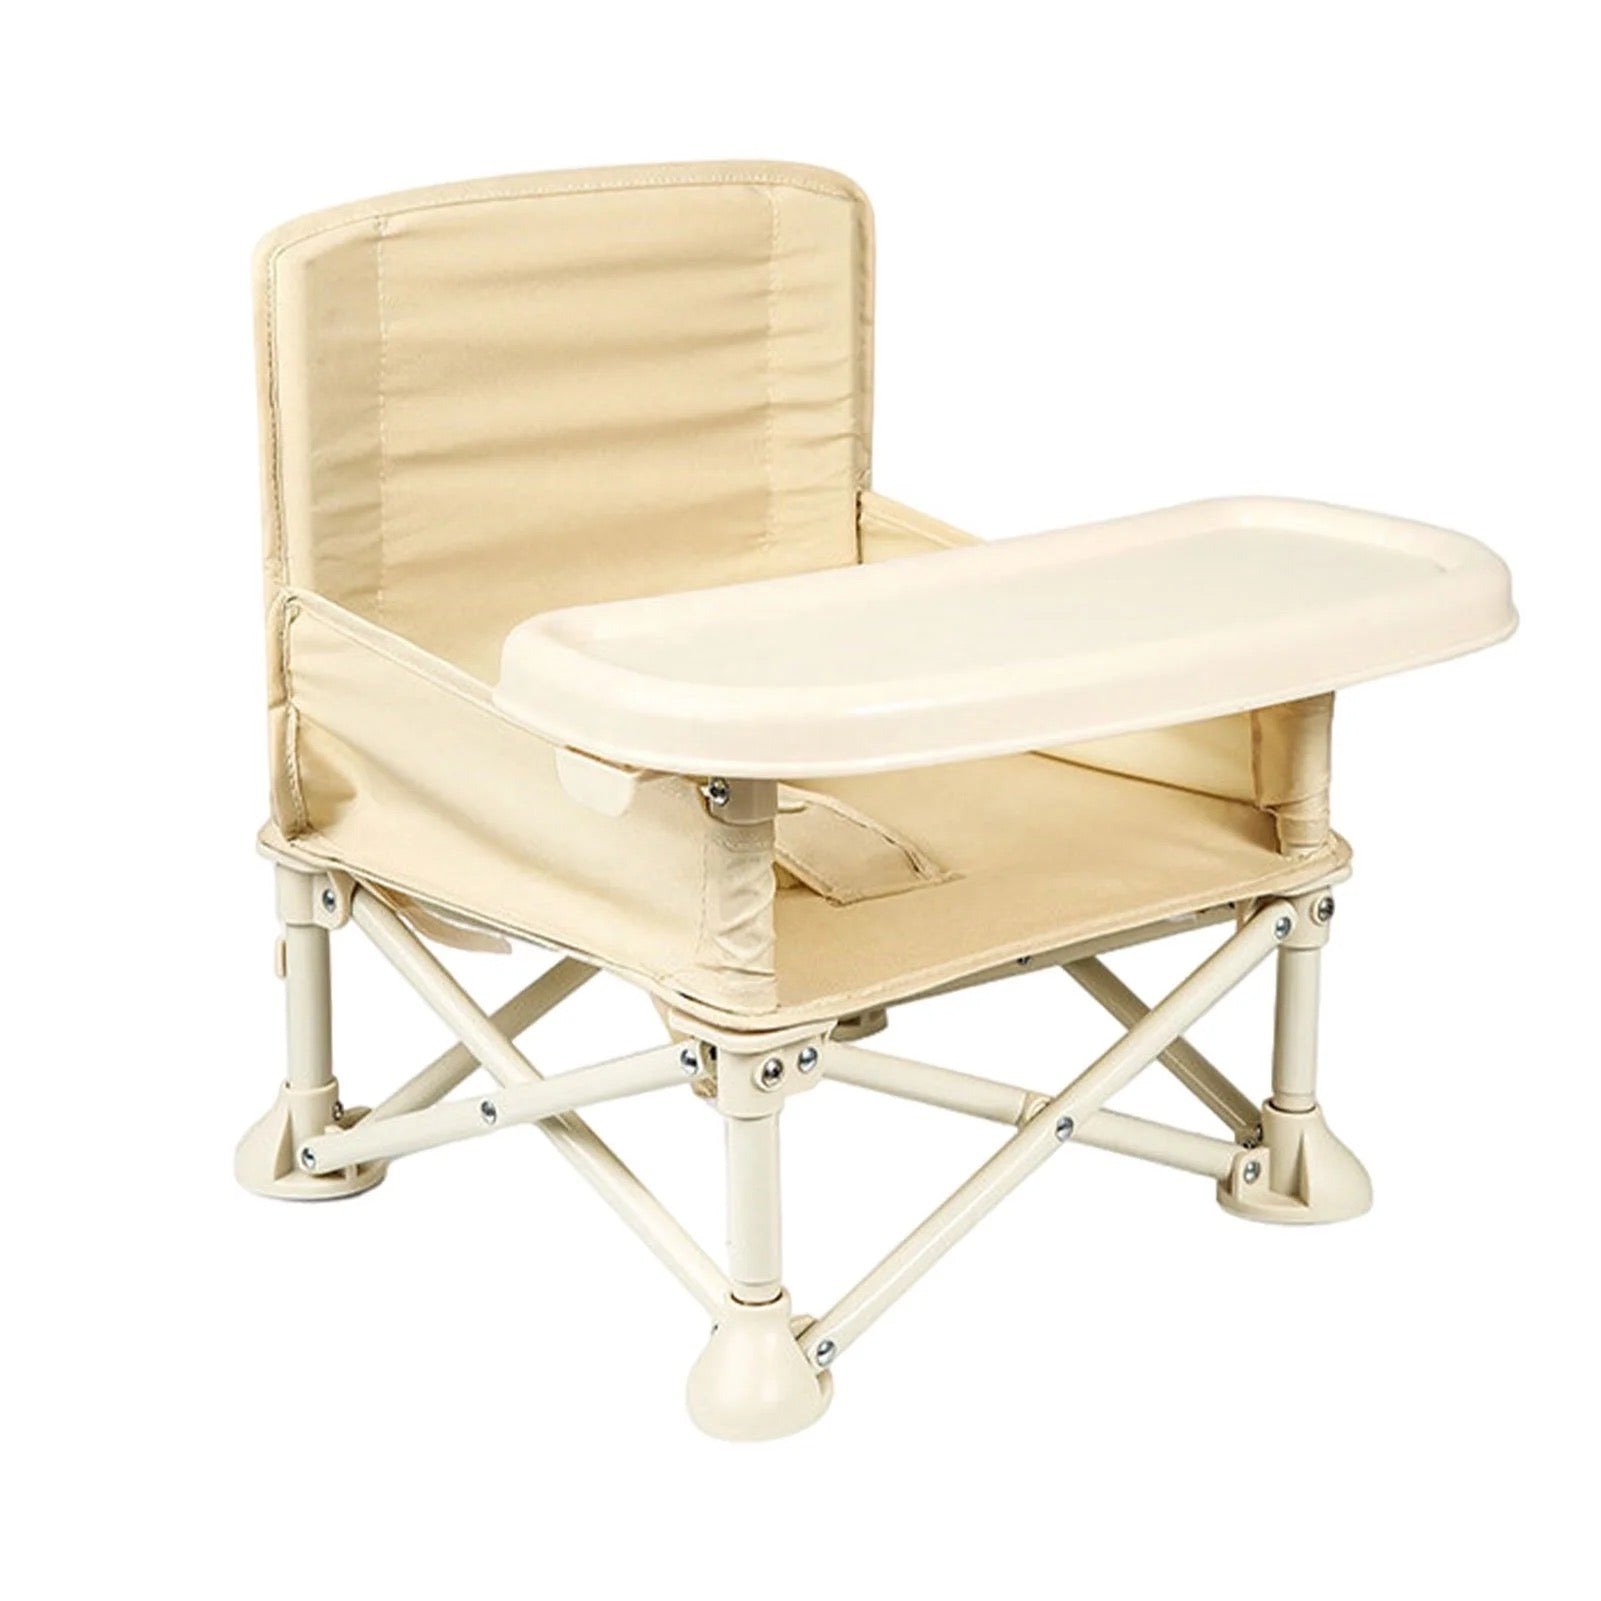 Baby & Toddler Portable Folding Travel & Activity Chair With Tray - Beige Color